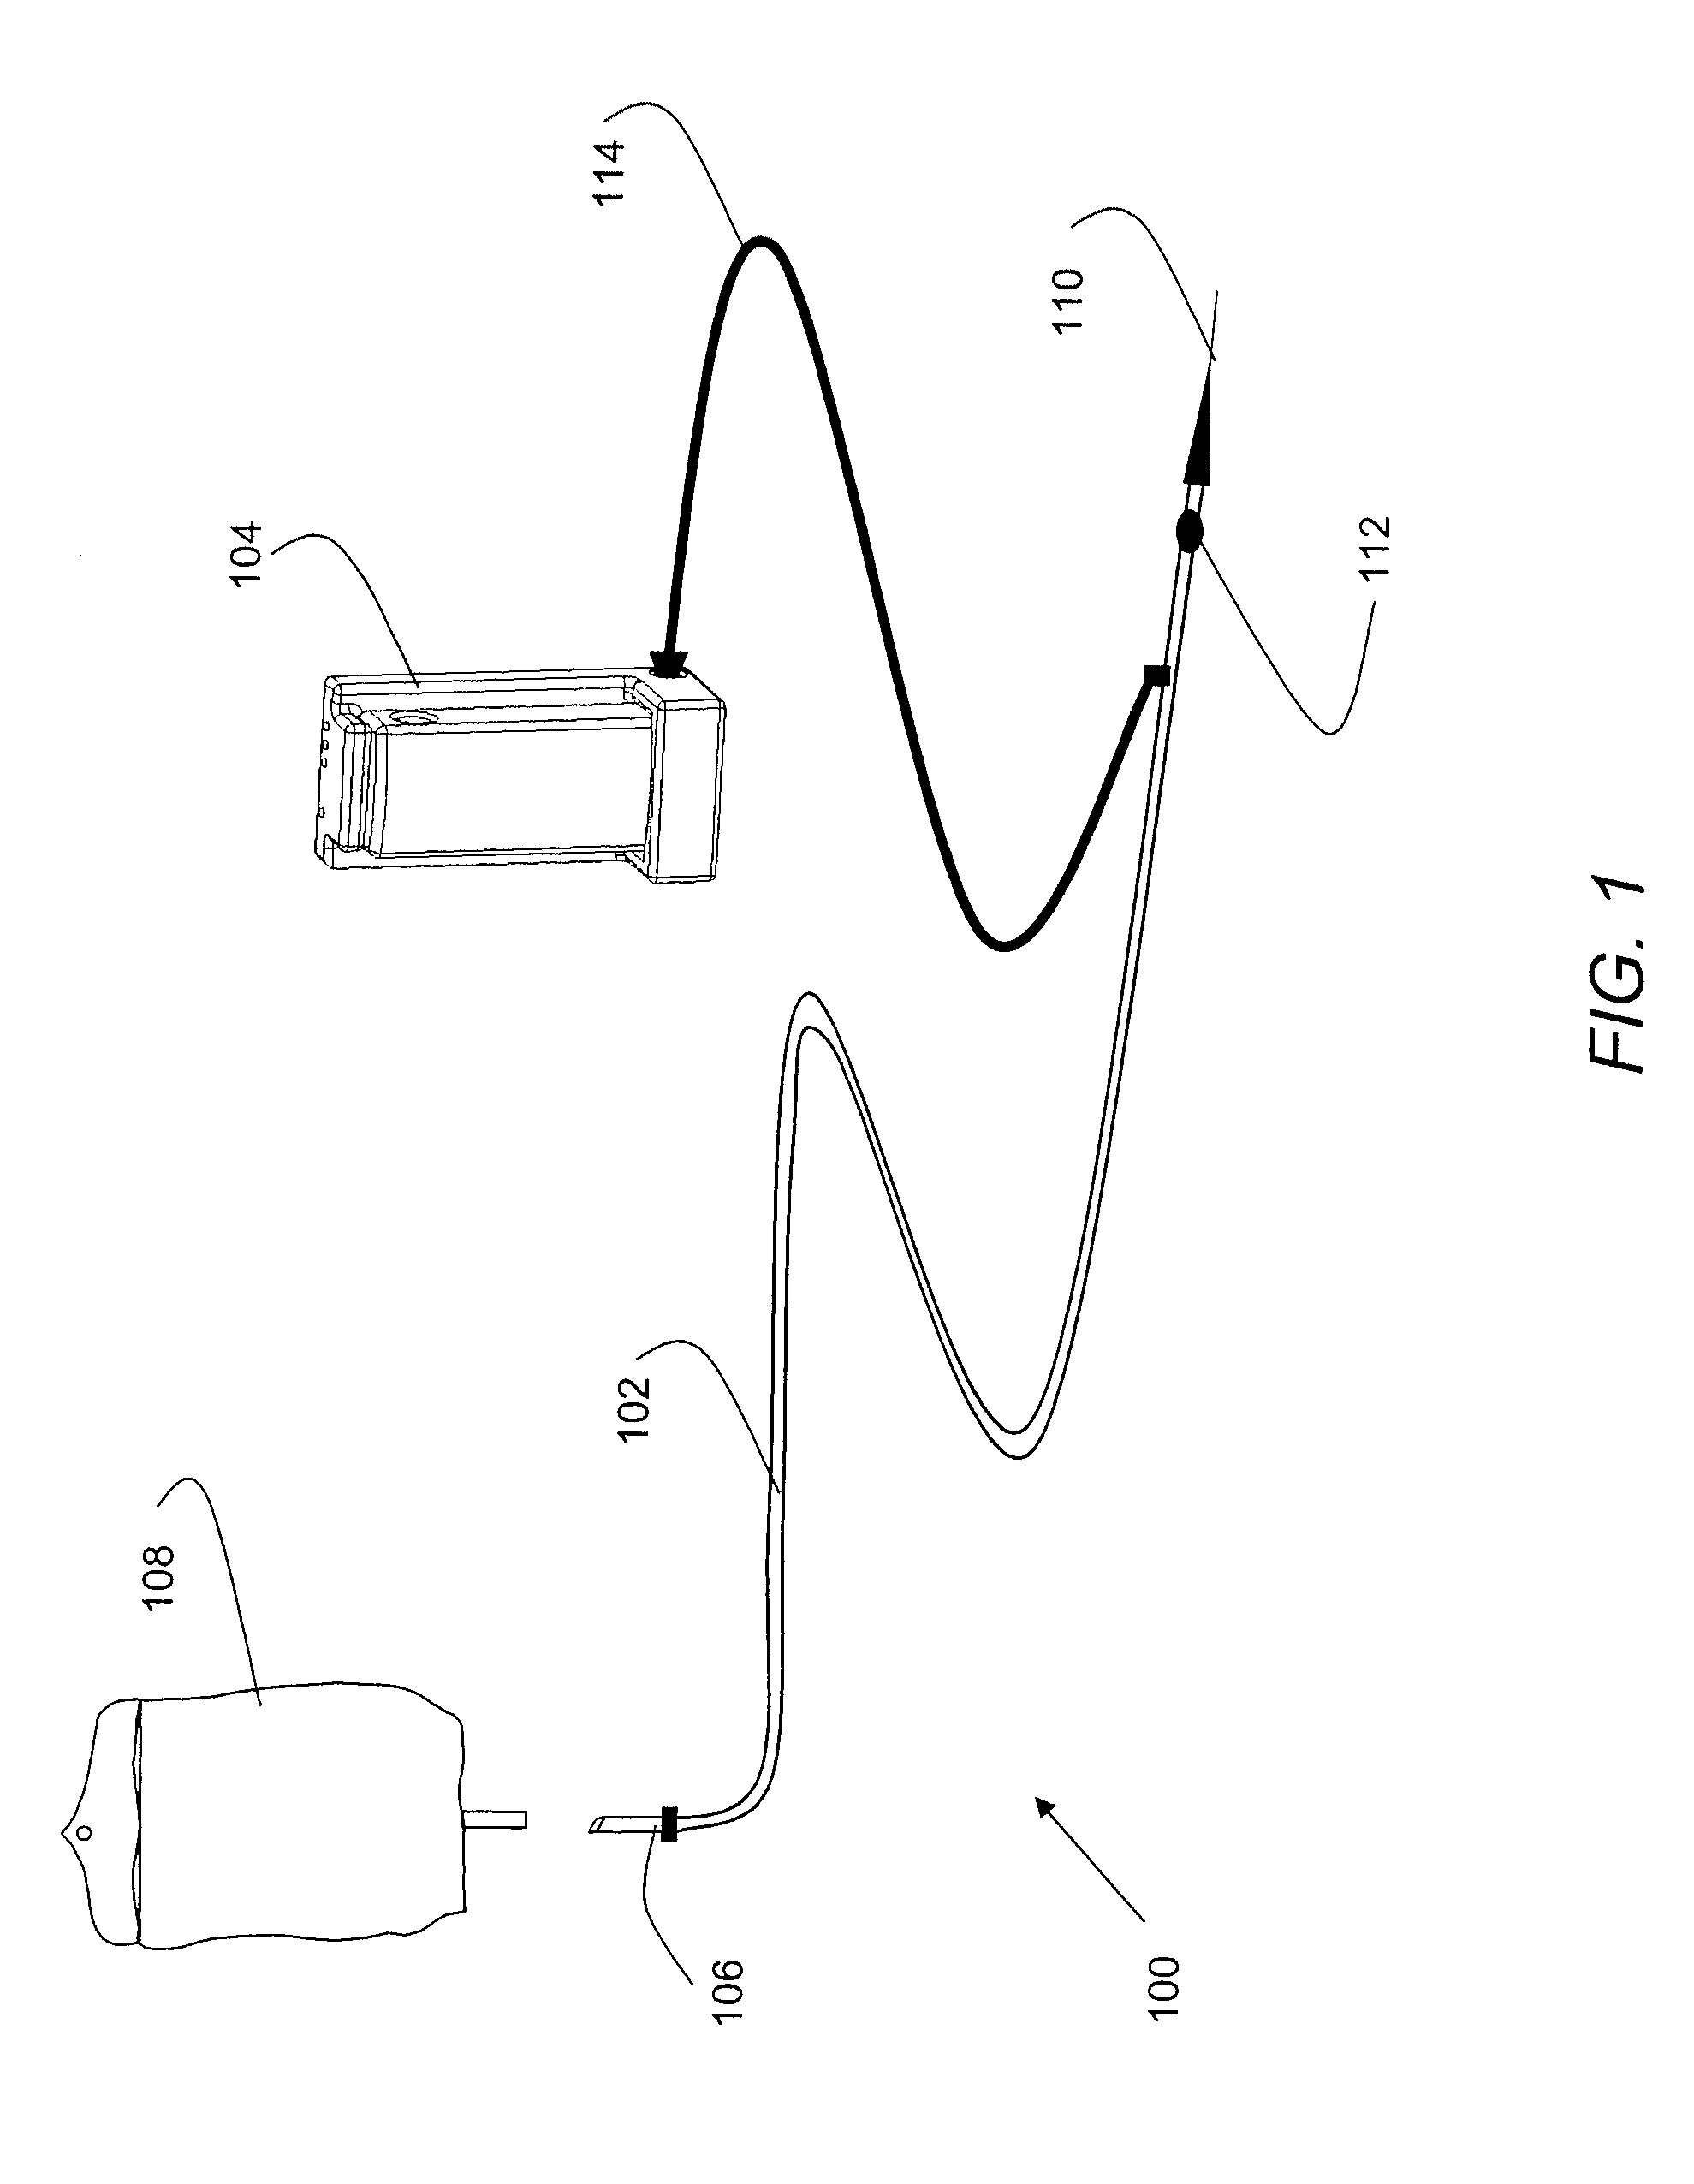 Method and apparatus for warming or cooling a fluid